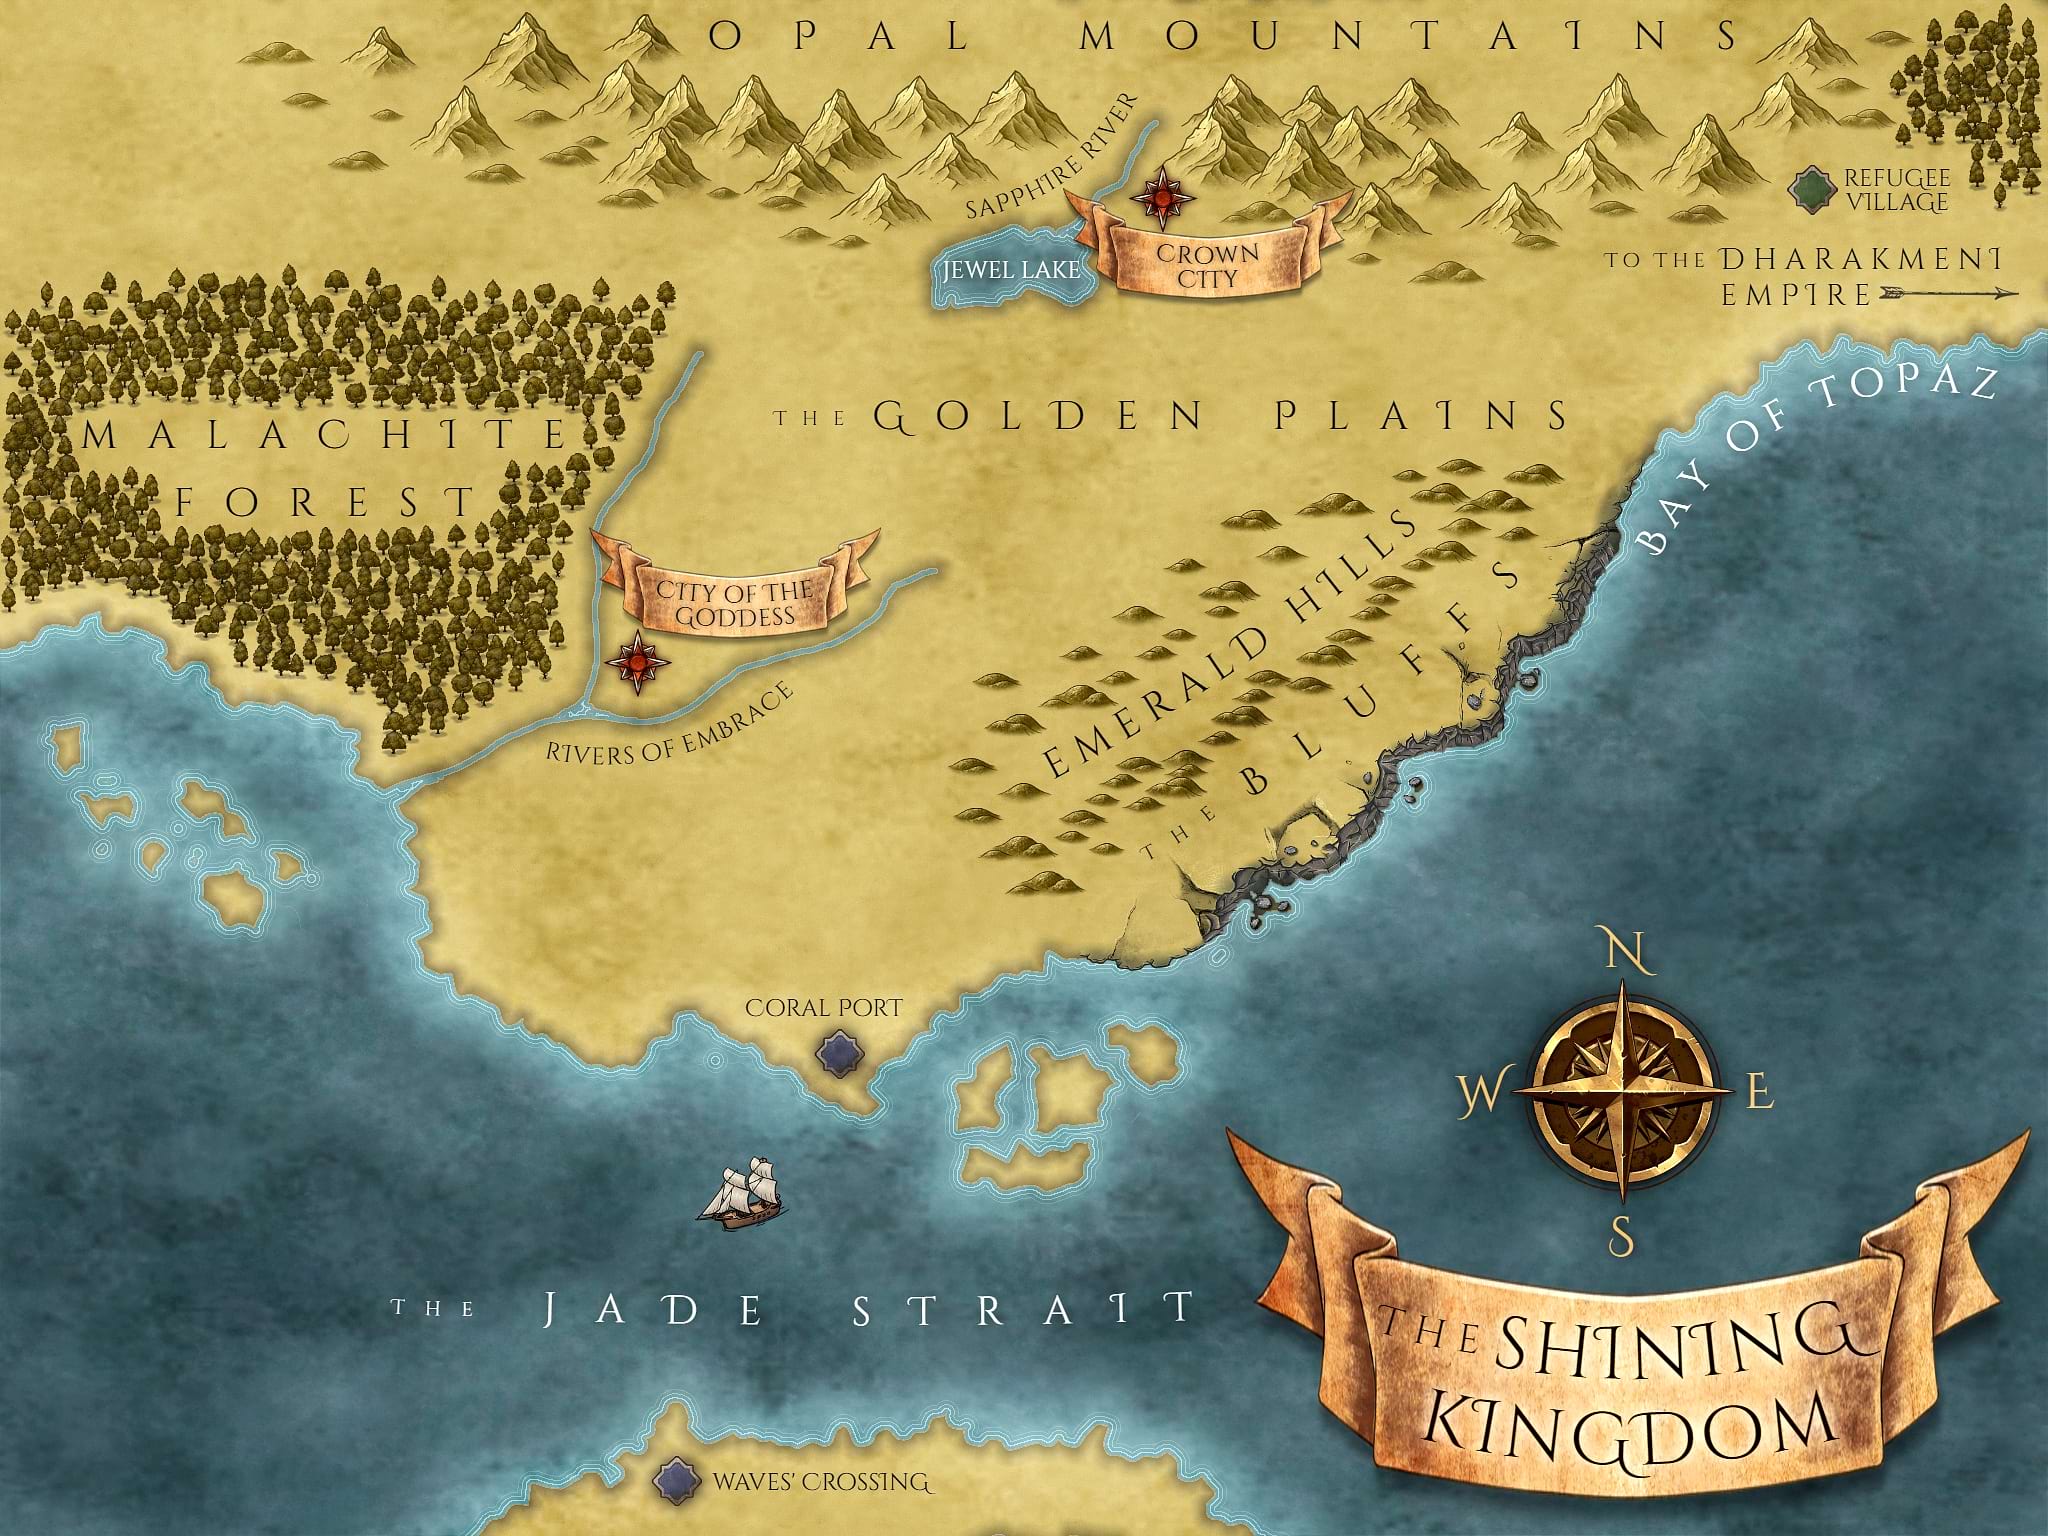 Shining Kingdom map from Fatal Empire fantasy intrigue series